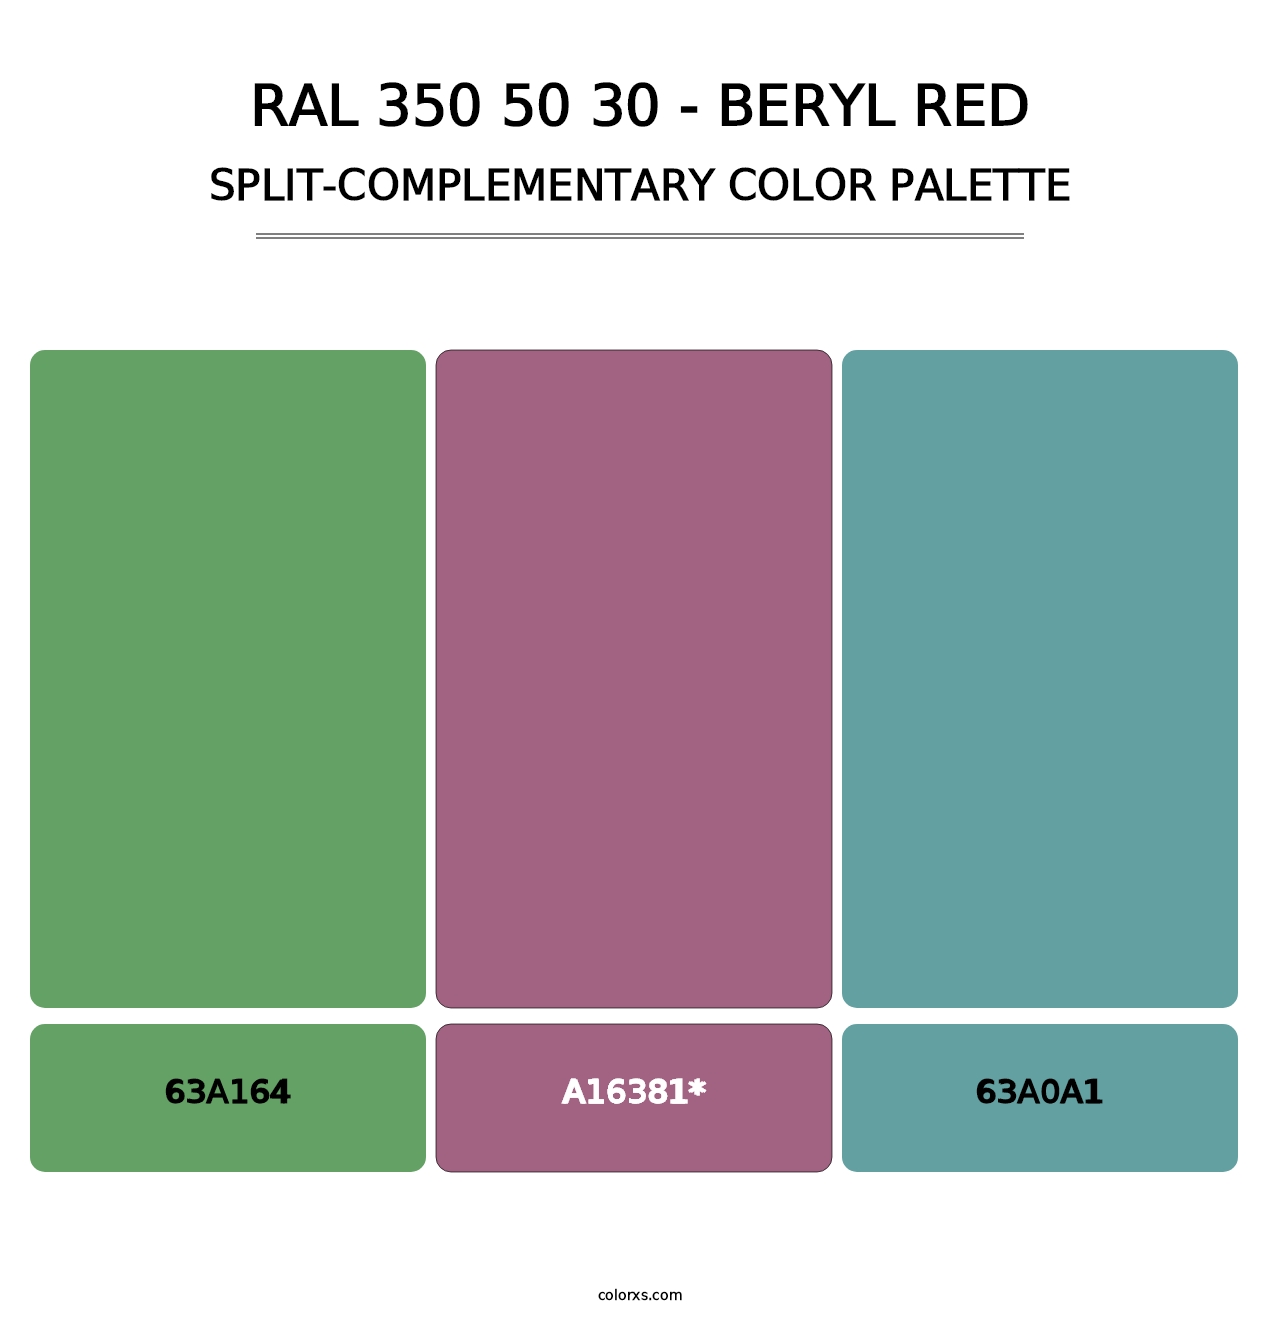 RAL 350 50 30 - Beryl Red - Split-Complementary Color Palette